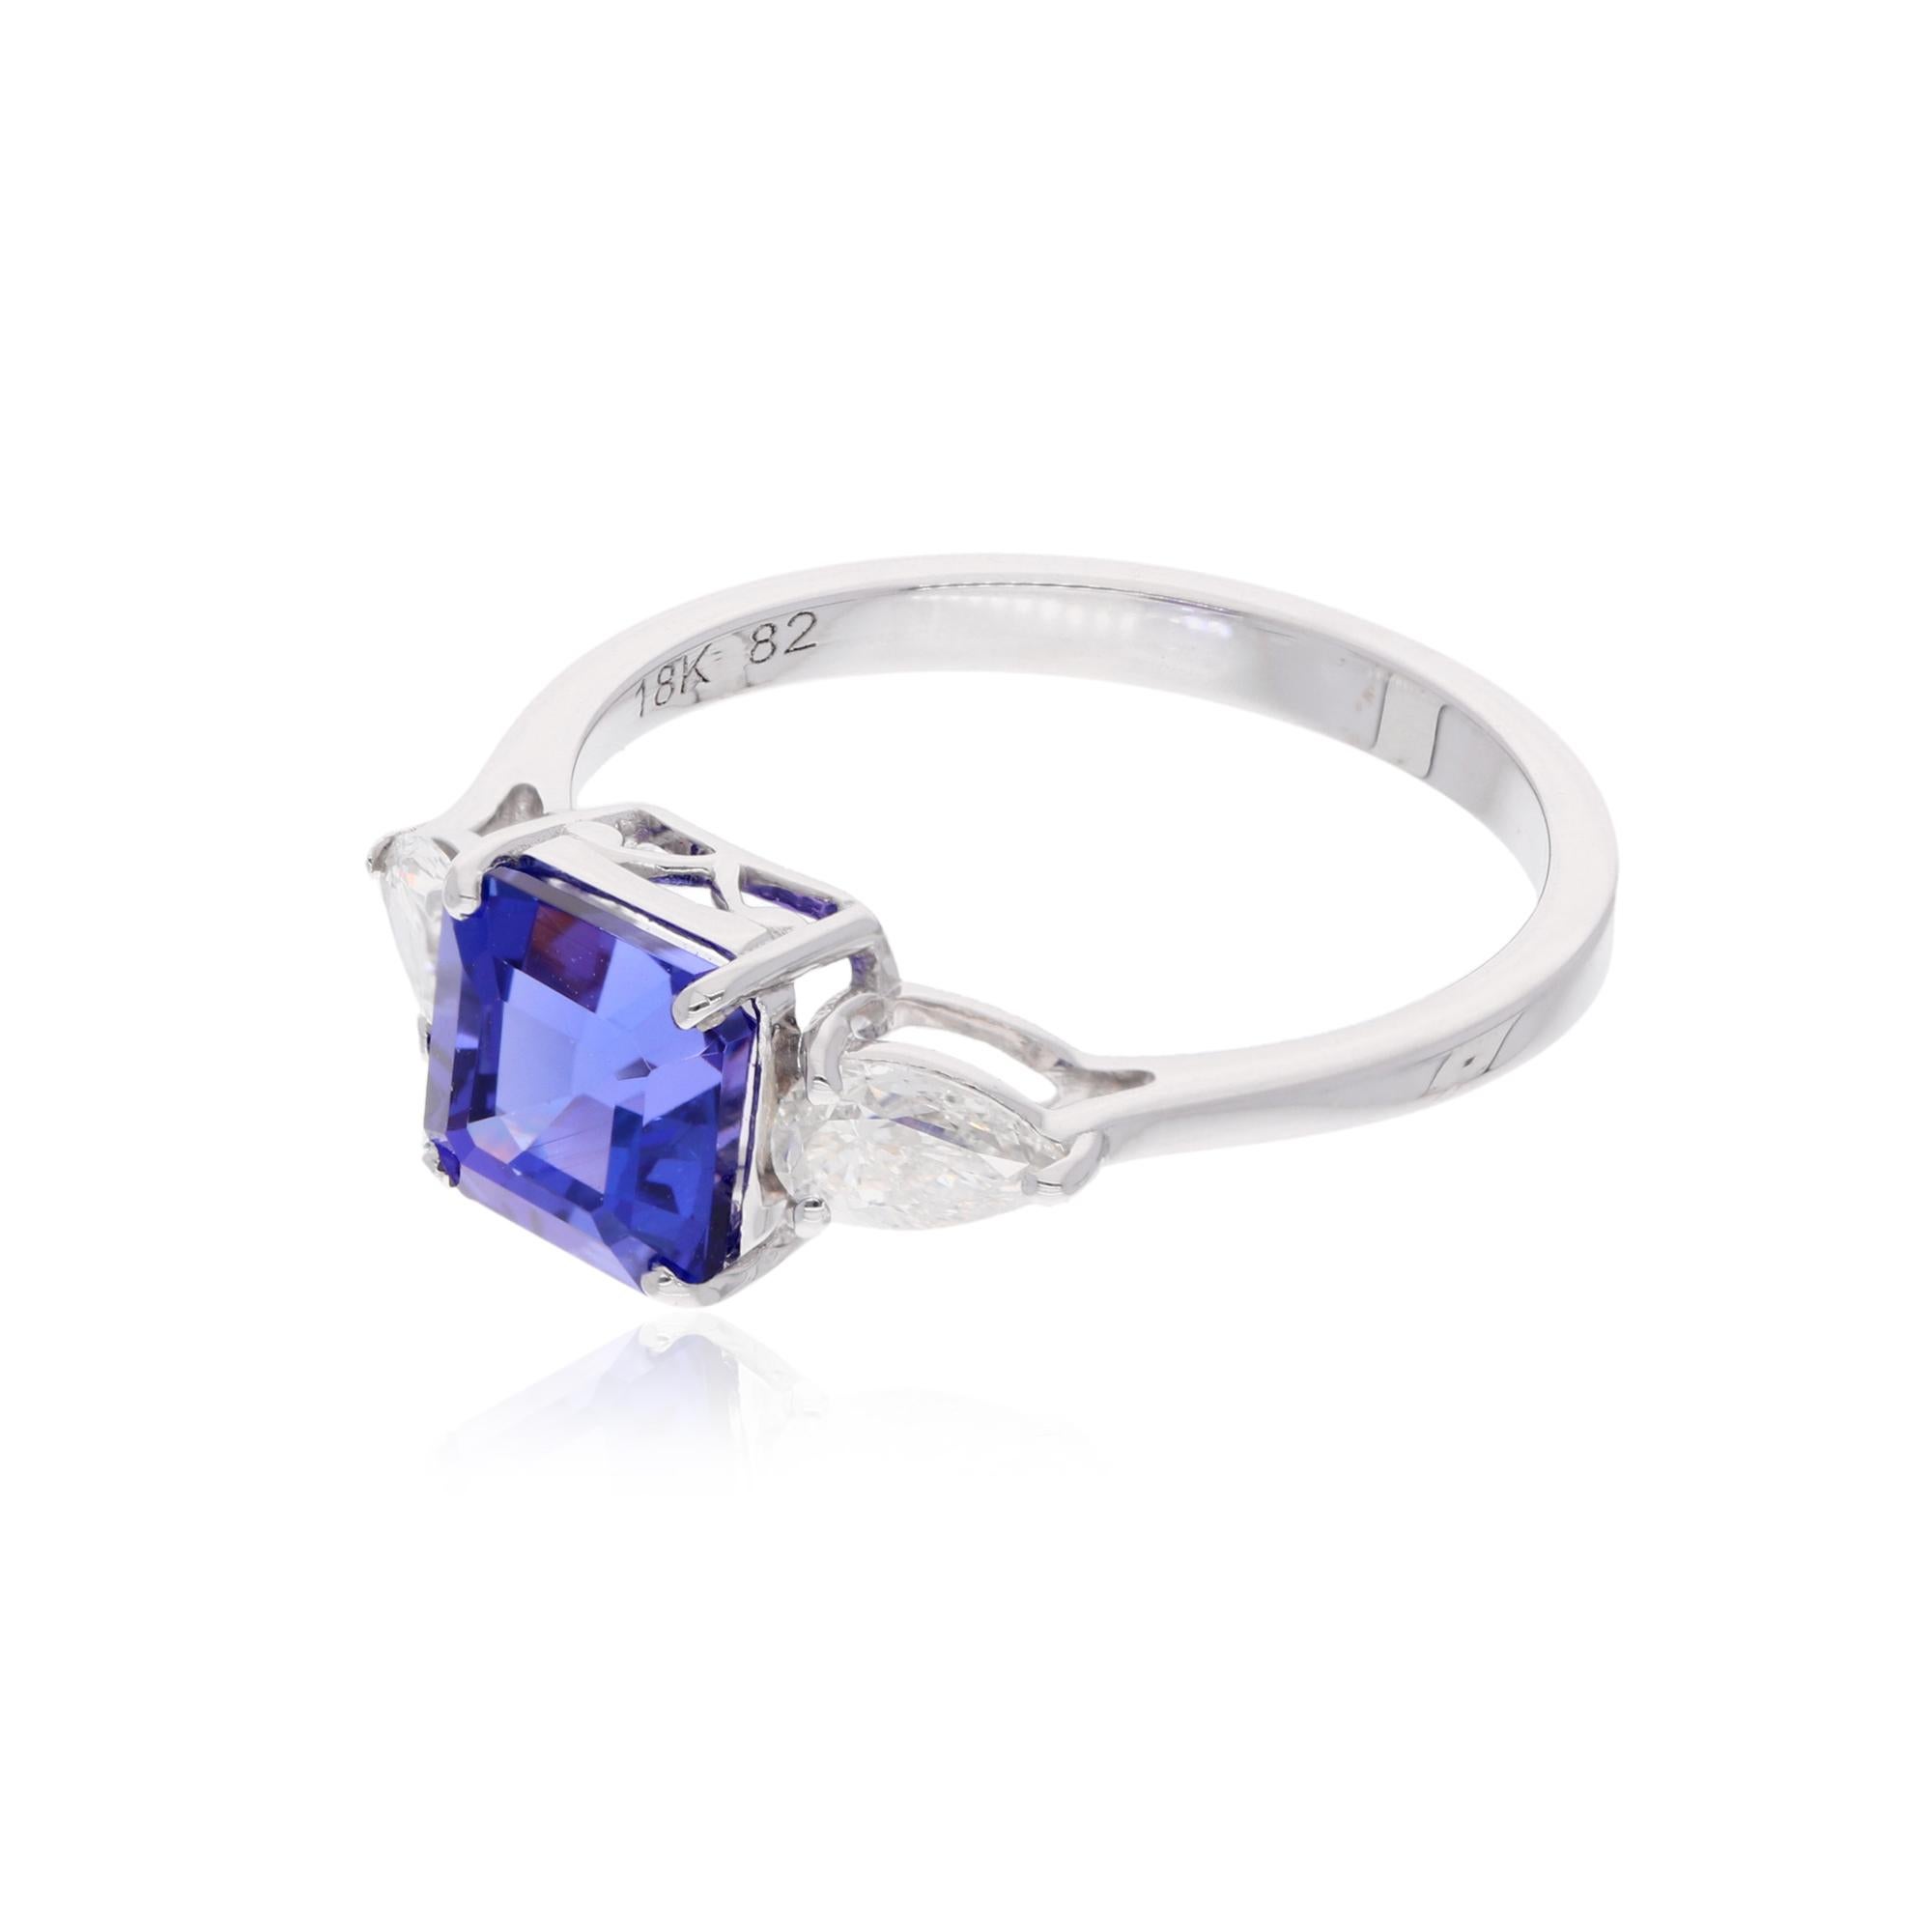 Item Code :- SER-22362
Gross Wt. :- 3.29 gm
18k Gold Wt. :- 2.77 gm
Natural Diamond Wt. :- 0.51 Ct. ( AVERAGE DIAMOND CLARITY SI1-SI2 & COLOR H-I )
Tanzanite Wt :- 2.08 Ct.
Ring Size :- 7 US & All size available

✦ Sizing
.....................
We